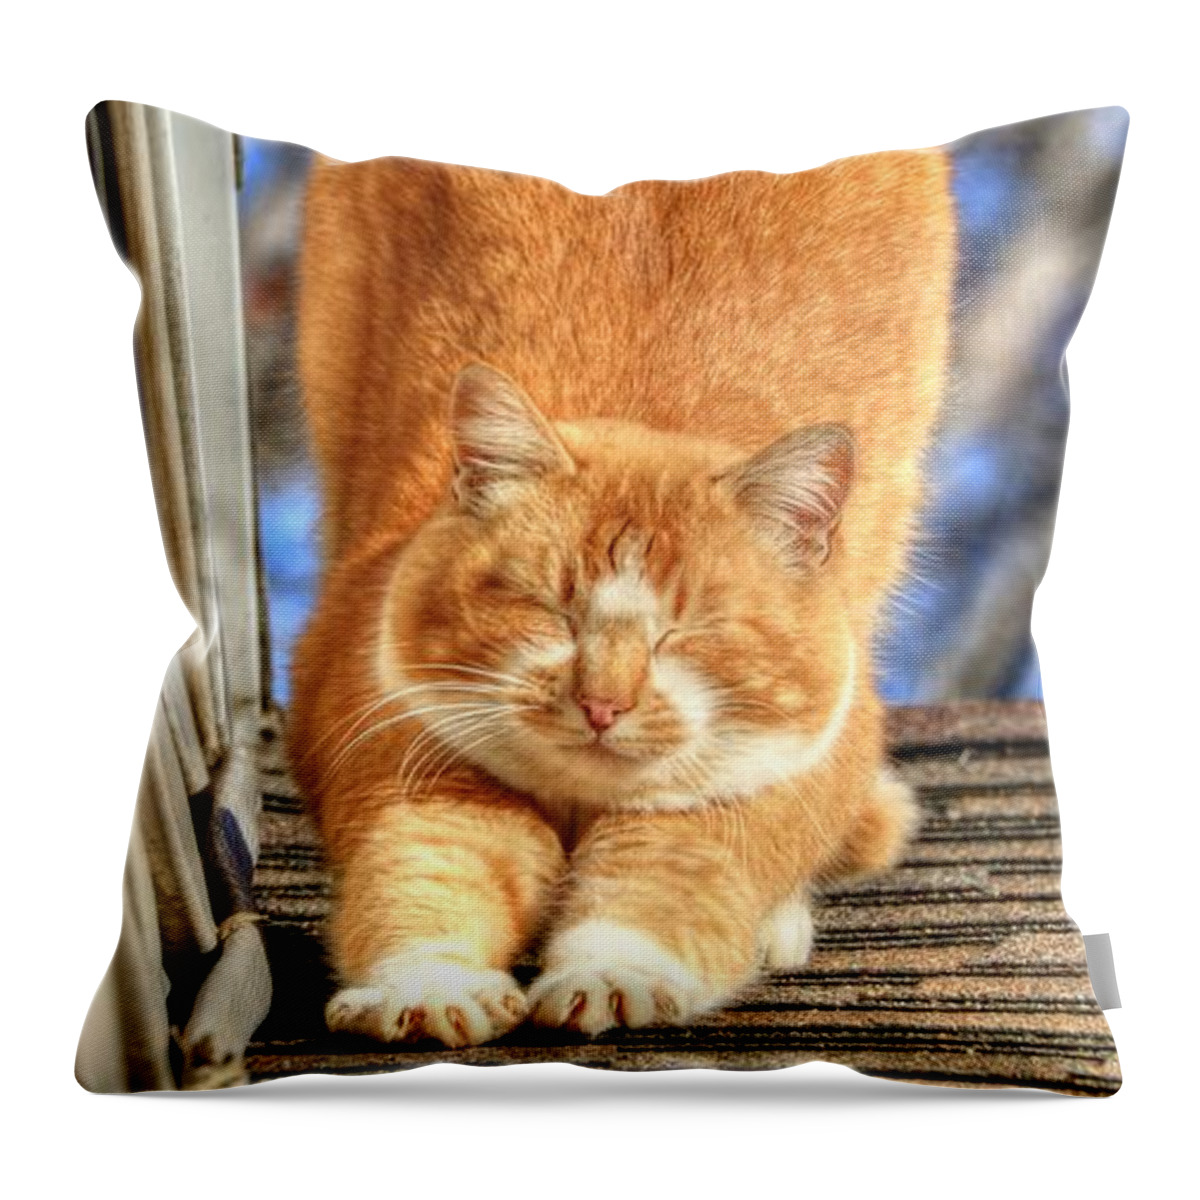 Tabby Throw Pillow featuring the photograph Morning Stretch by J Laughlin